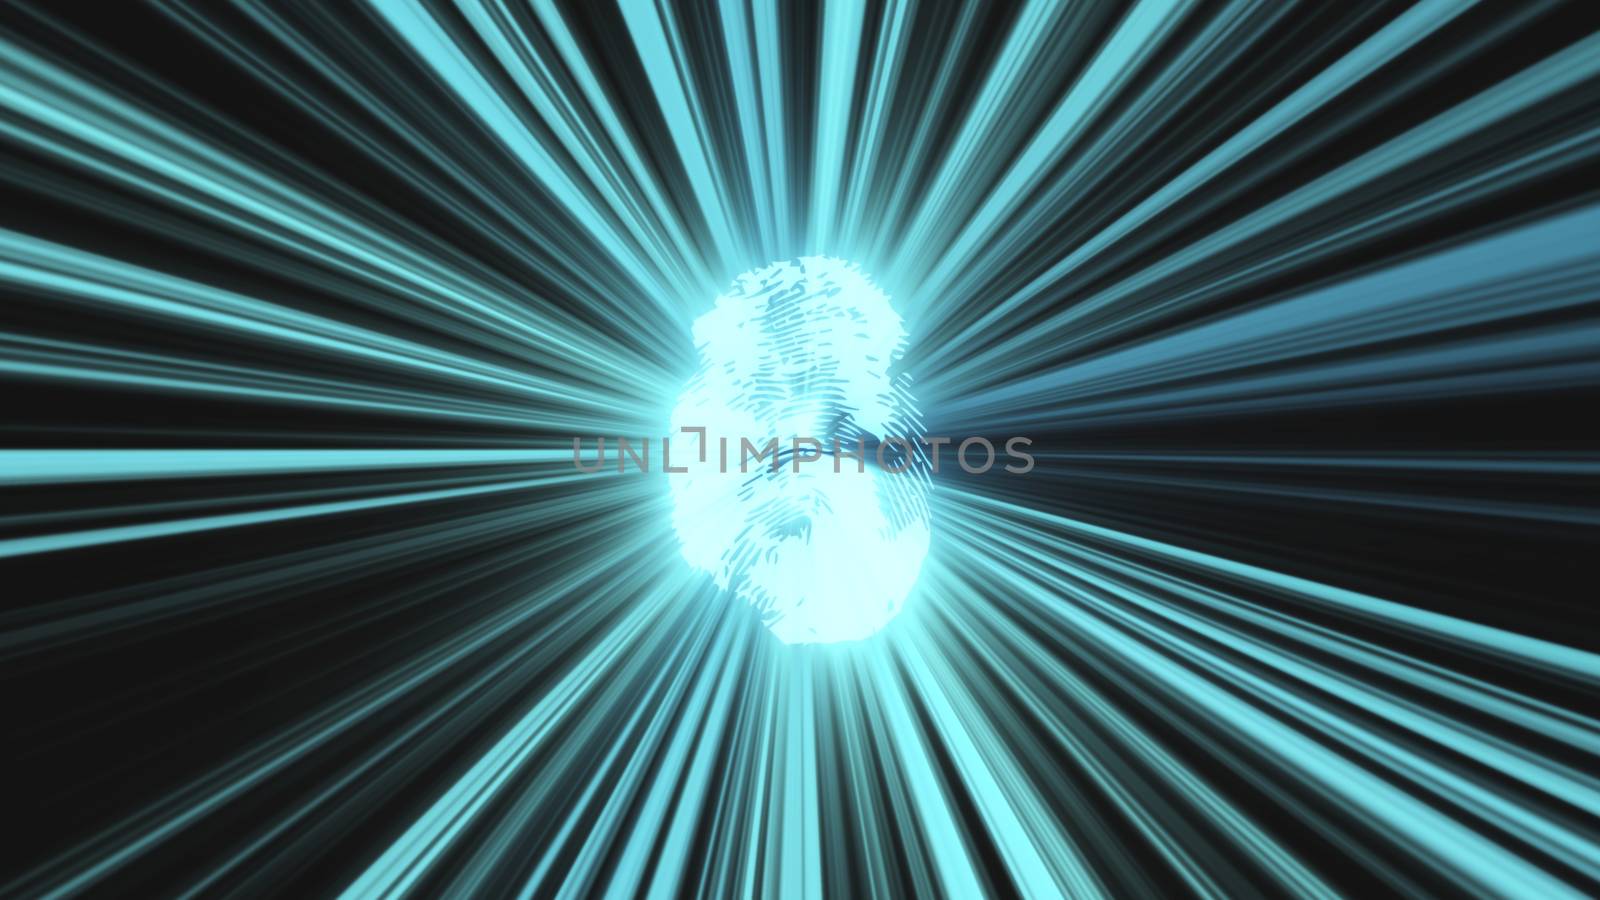 Abstract background with fingerprint and rays. Technology 3d render